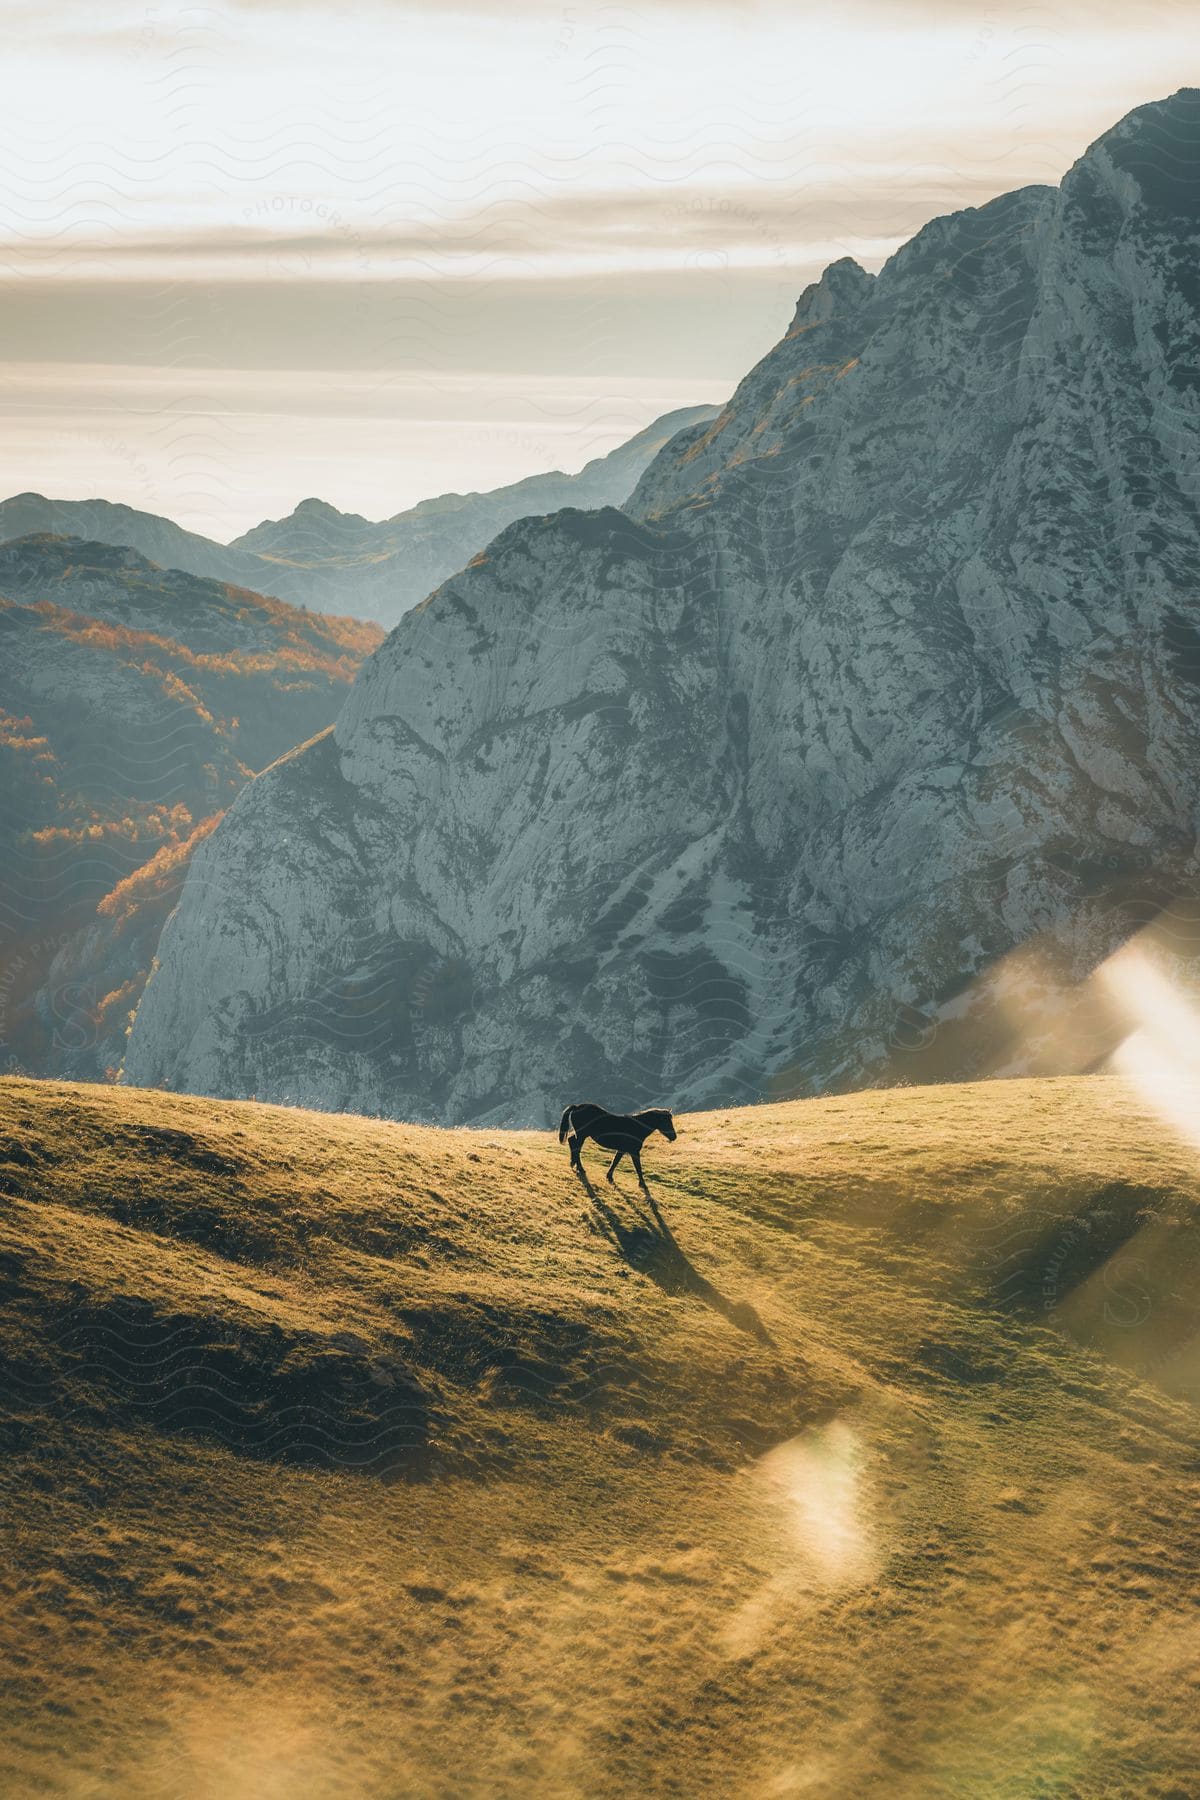 a black horse standing on a grassy hill, with a large mountain range in the background.